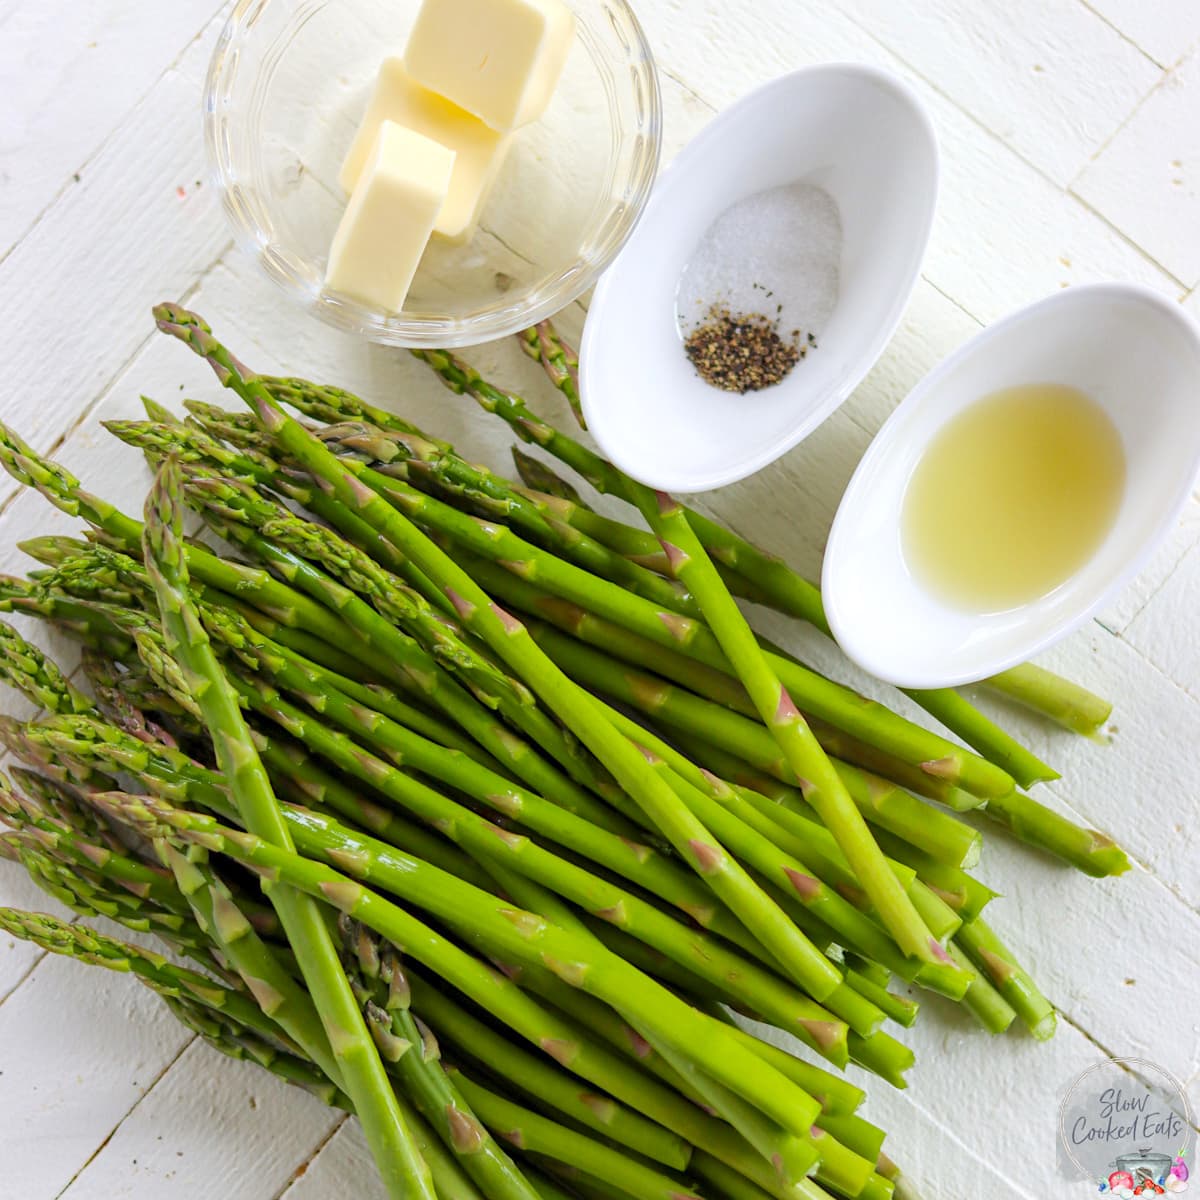 Ingredients needed for making crockpot asparagus.